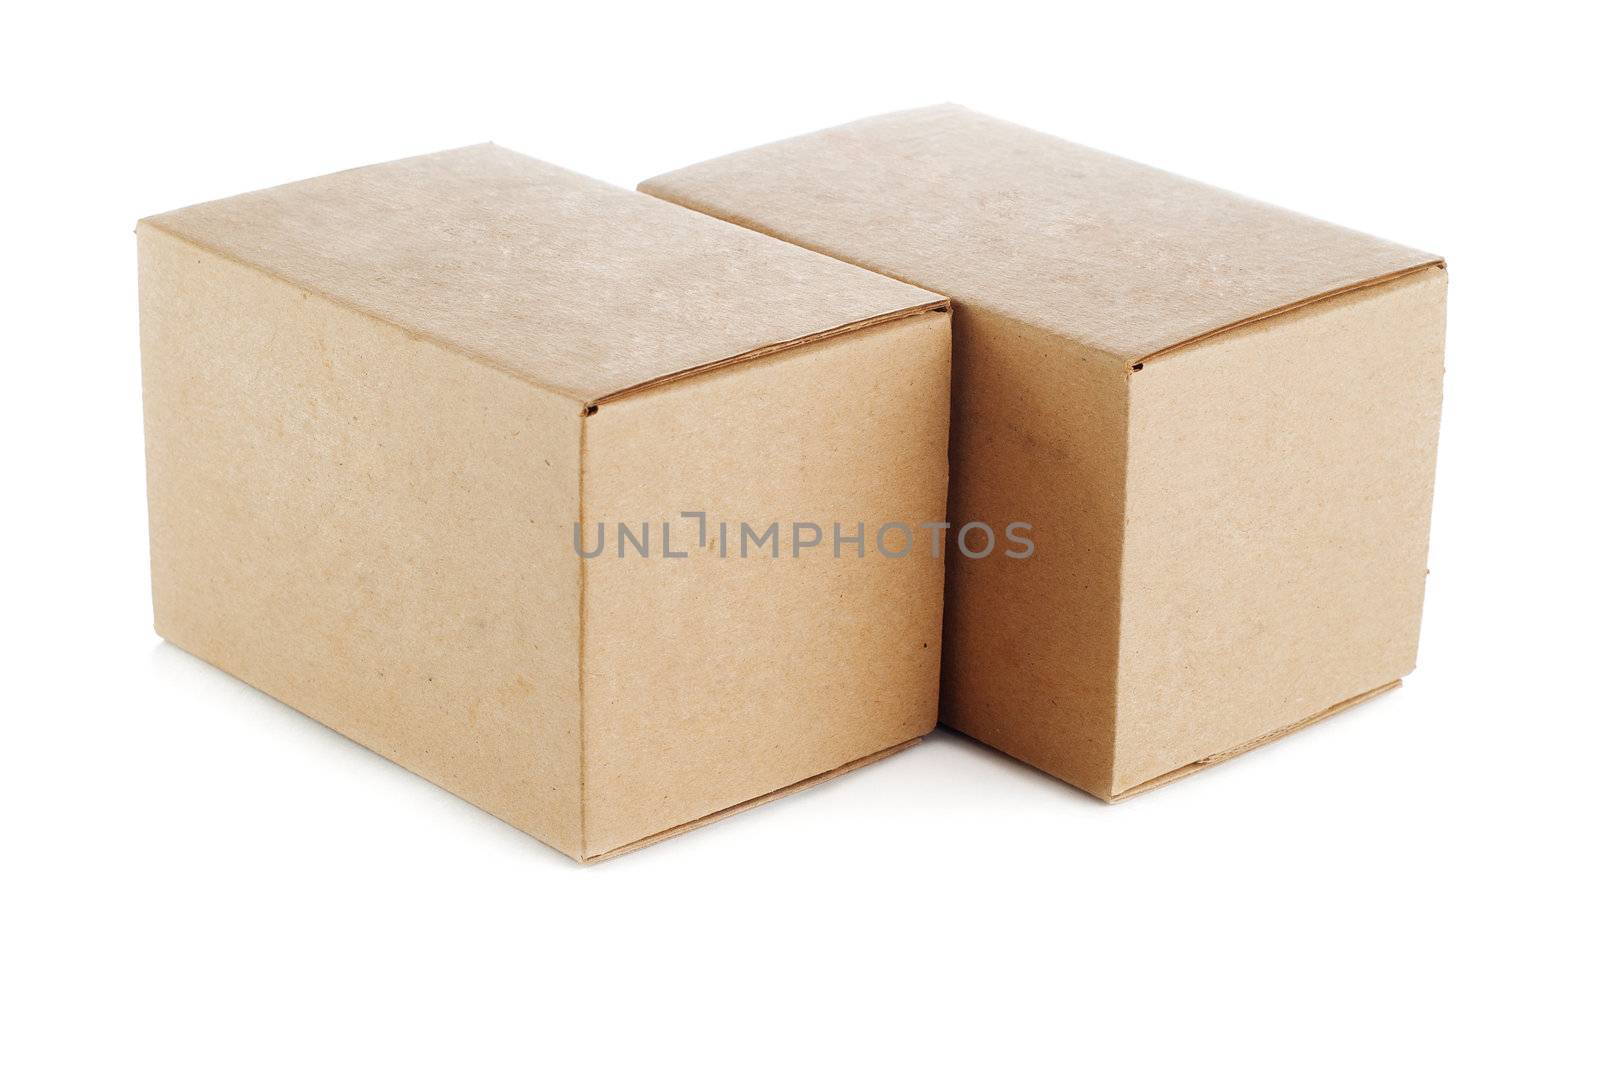 two cardboard boxes on a white background